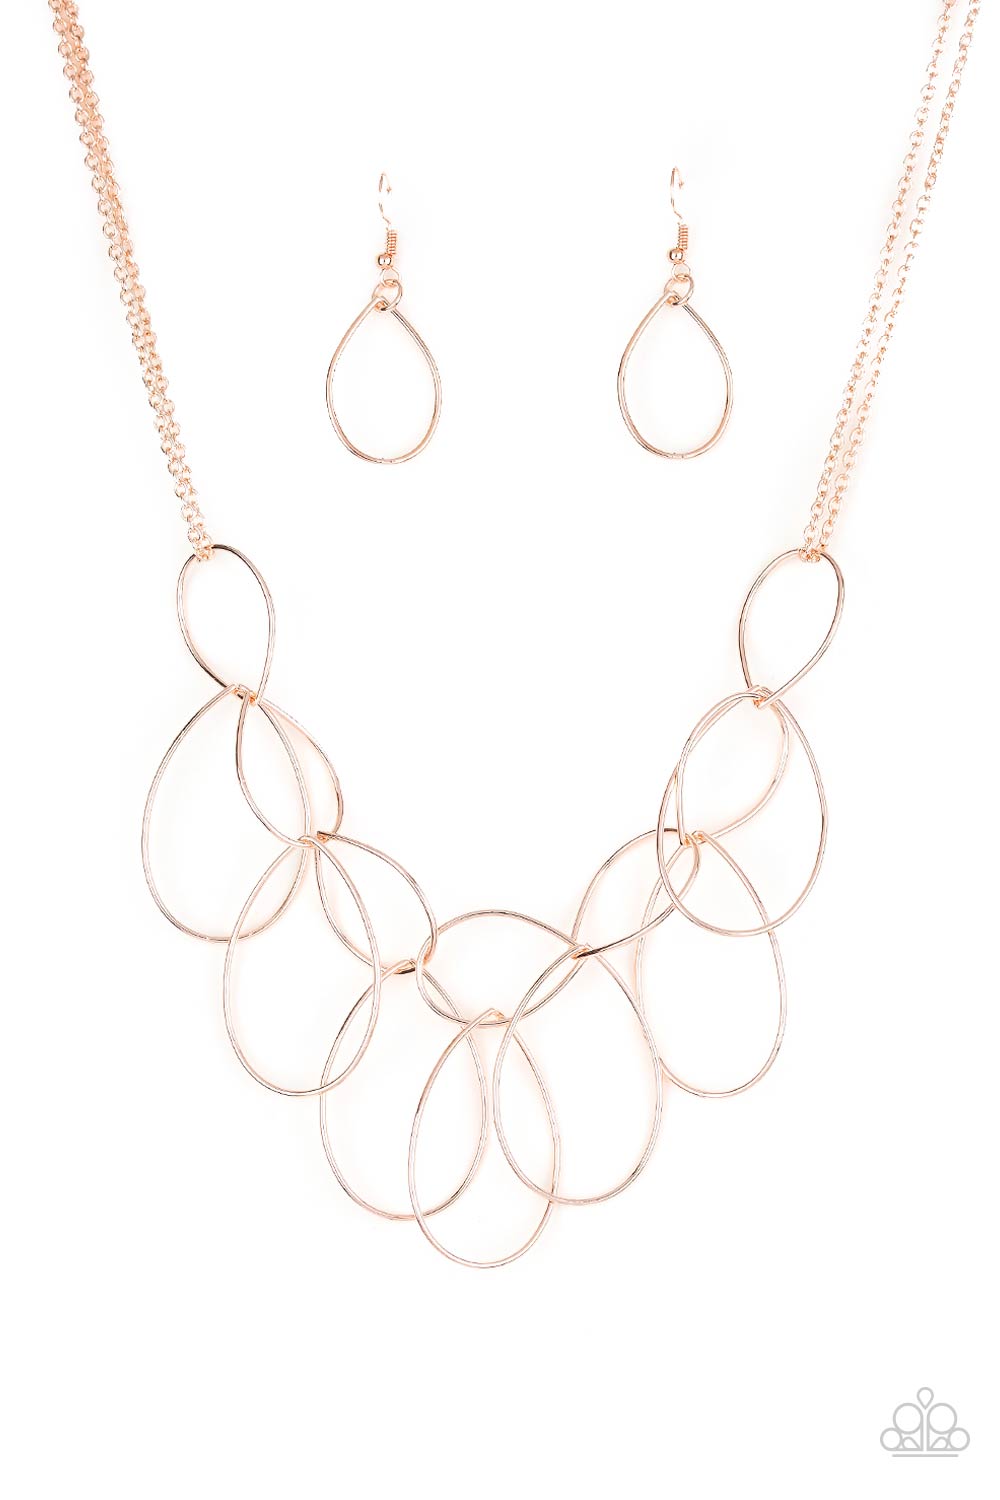 Top-TEAR Fashion Necklace - Rose Gold